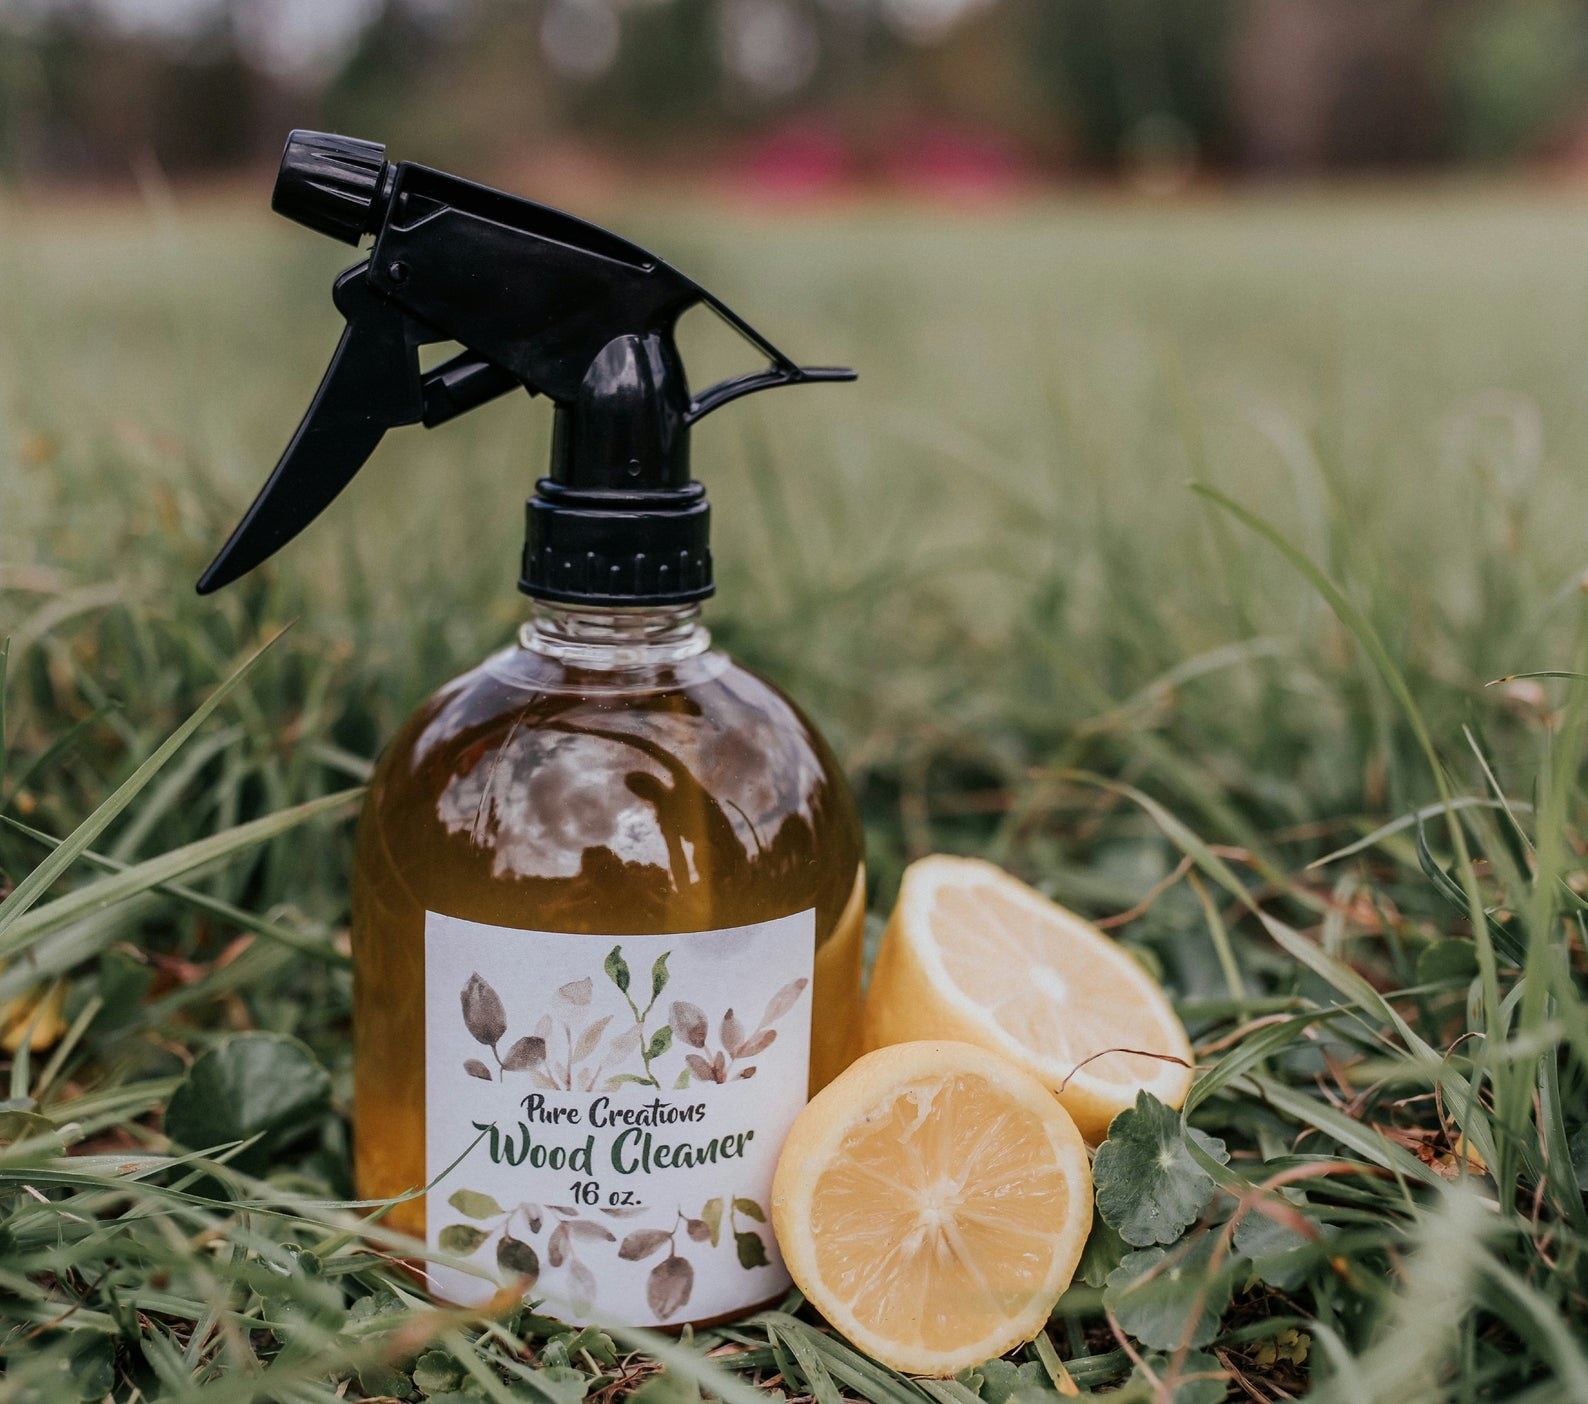 Bottle of Pure Creations Wood Cleaner placed in grass next to slice lemons